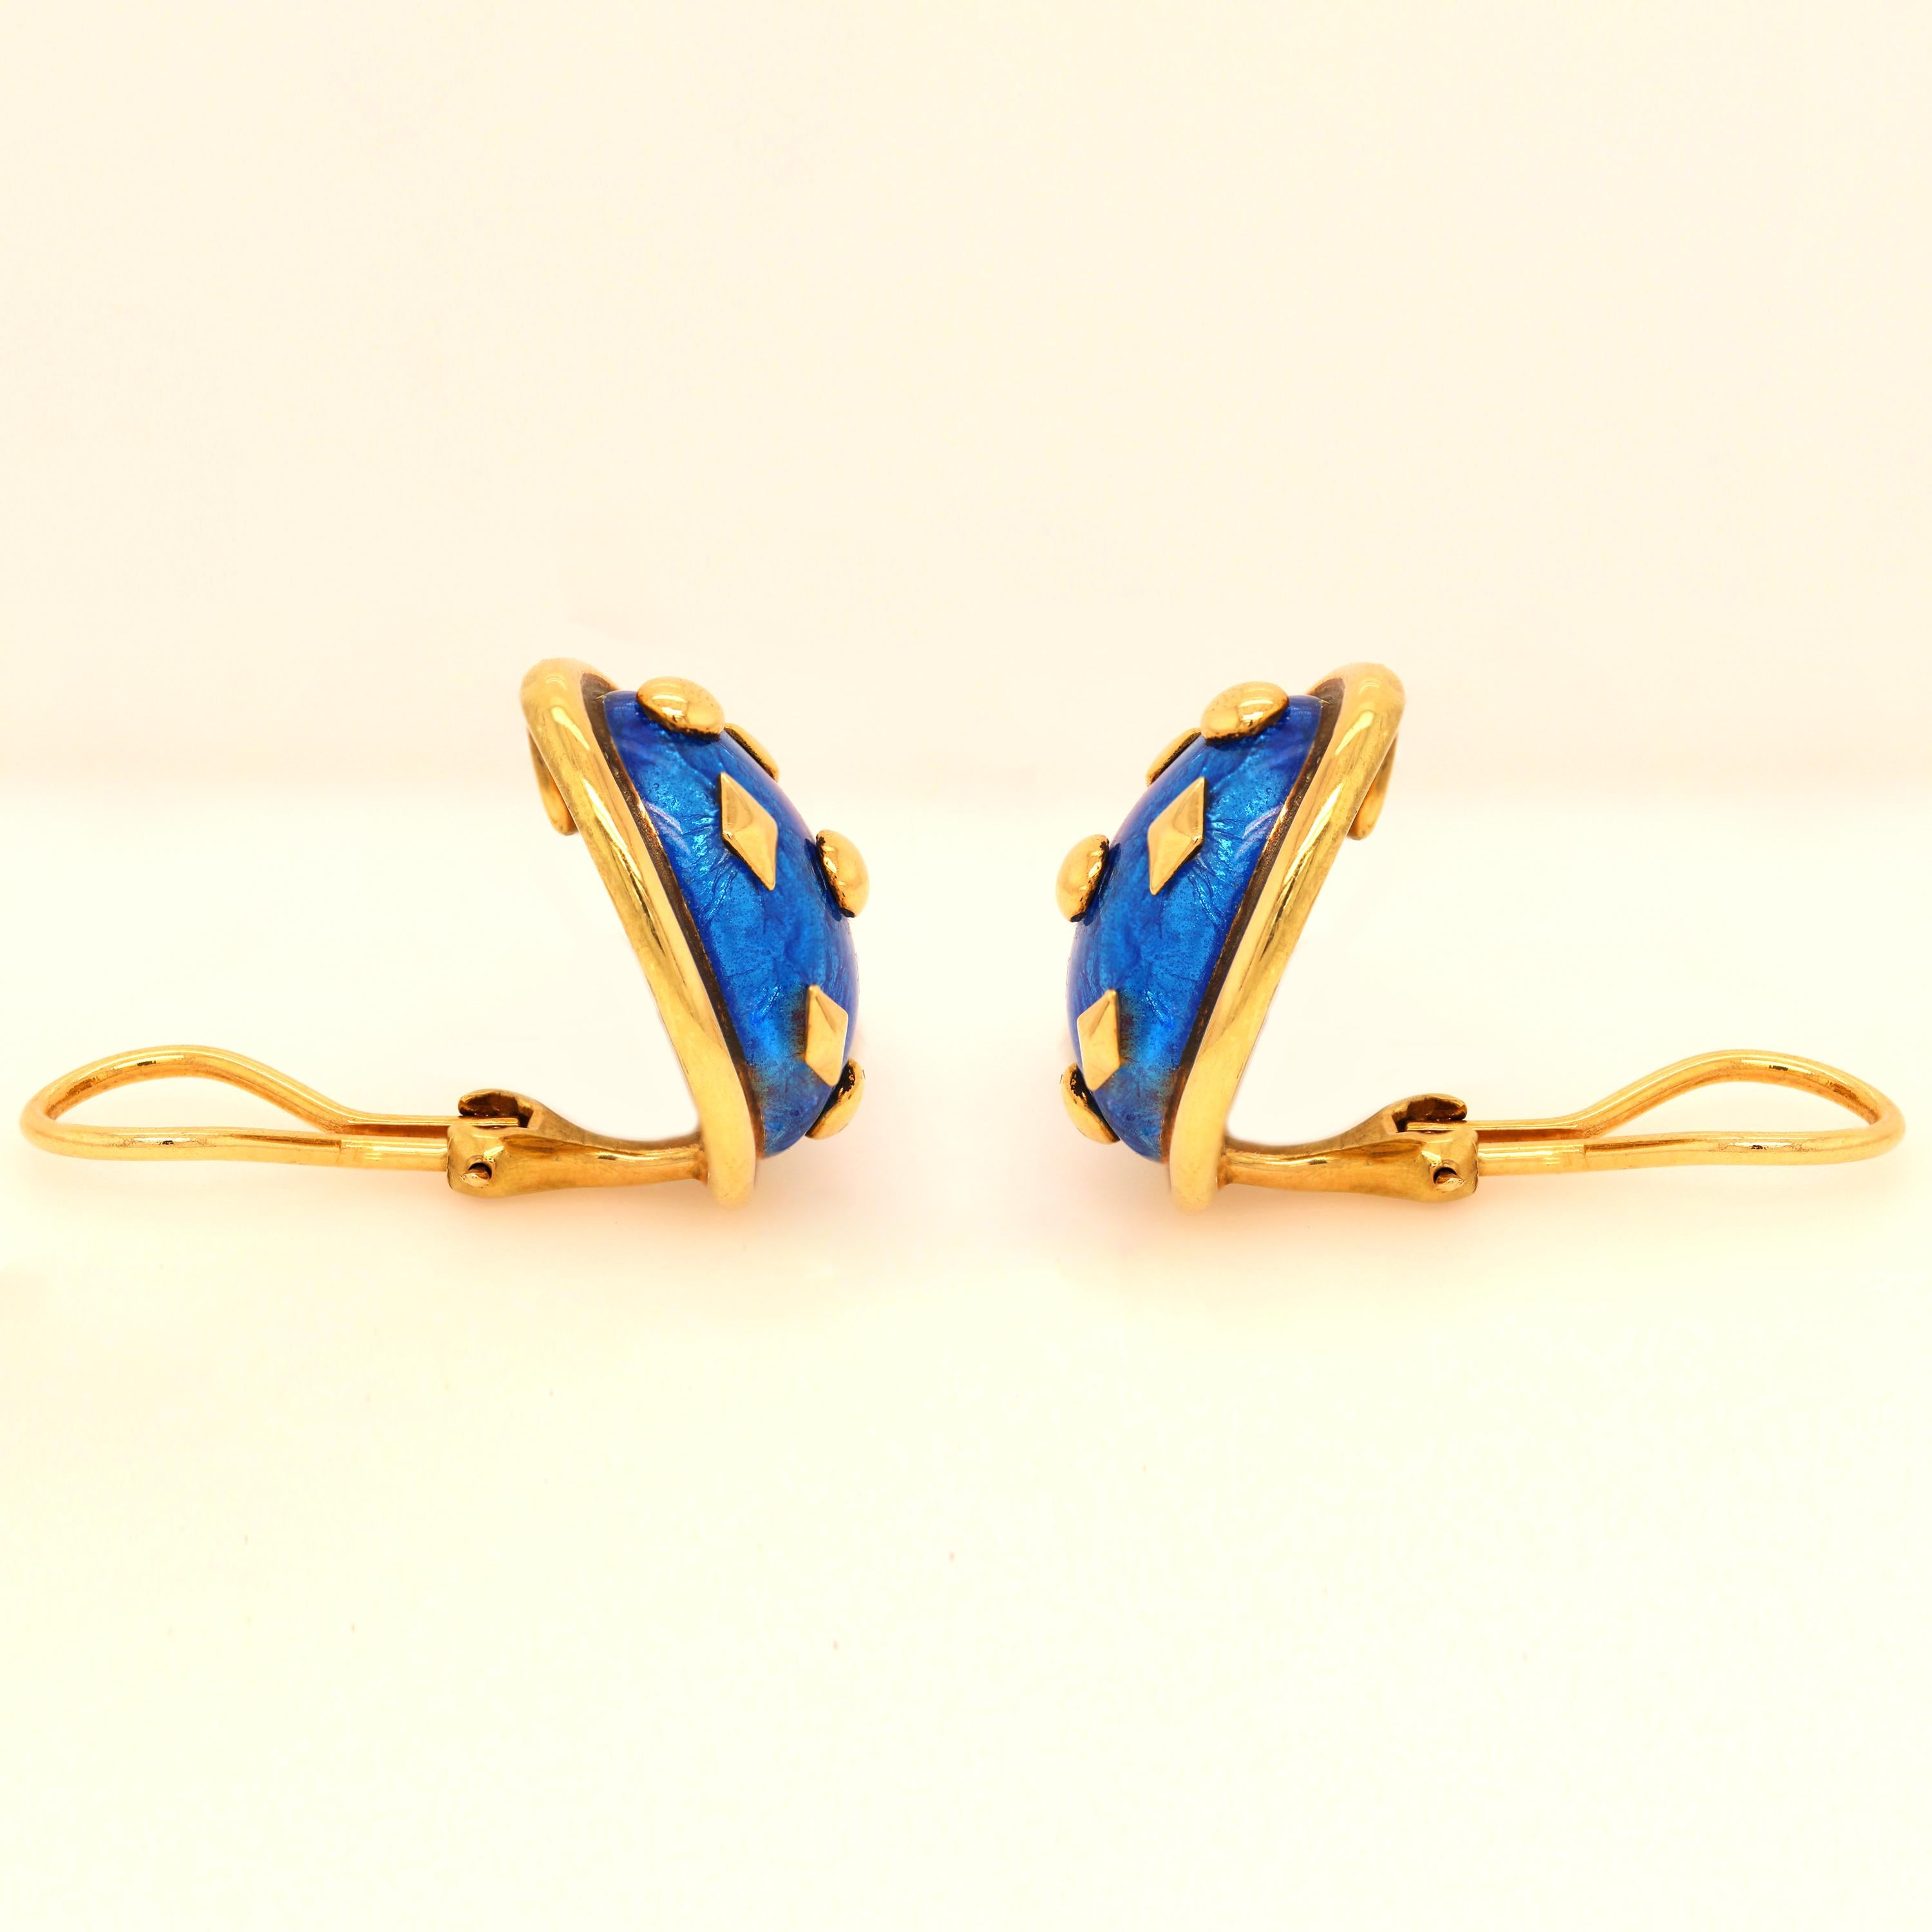 Tiffany & Co. Schlumberger 18K Gold Blue Enamel Dot Lozenge Earrings

Created by Jean Schlumberger for Tiffany & Co., these earrings feature a stunning shell like oval shape form with cobalt blue enamel and gold border, gold dots and rhombus